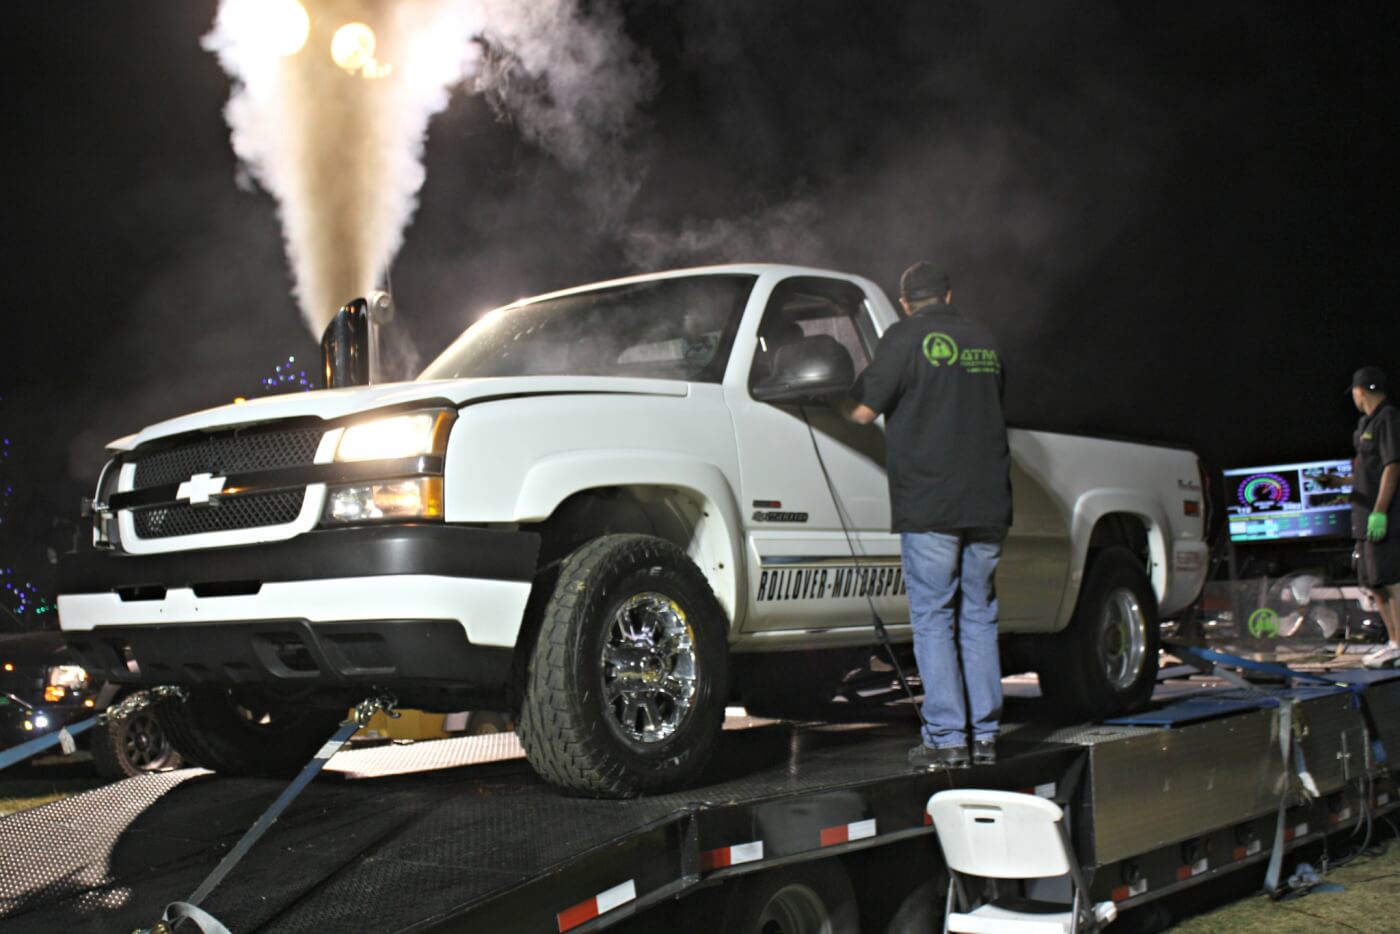 Dmitiri Millard has made a name for himself running monstrous horsepower numbers out of his Duramax-powered trucks for years now. The 2014 season was no different for Millard with this little single cab taking home top honors for the event with 1,336 hp and more than 2,000 lb-ft of torque.